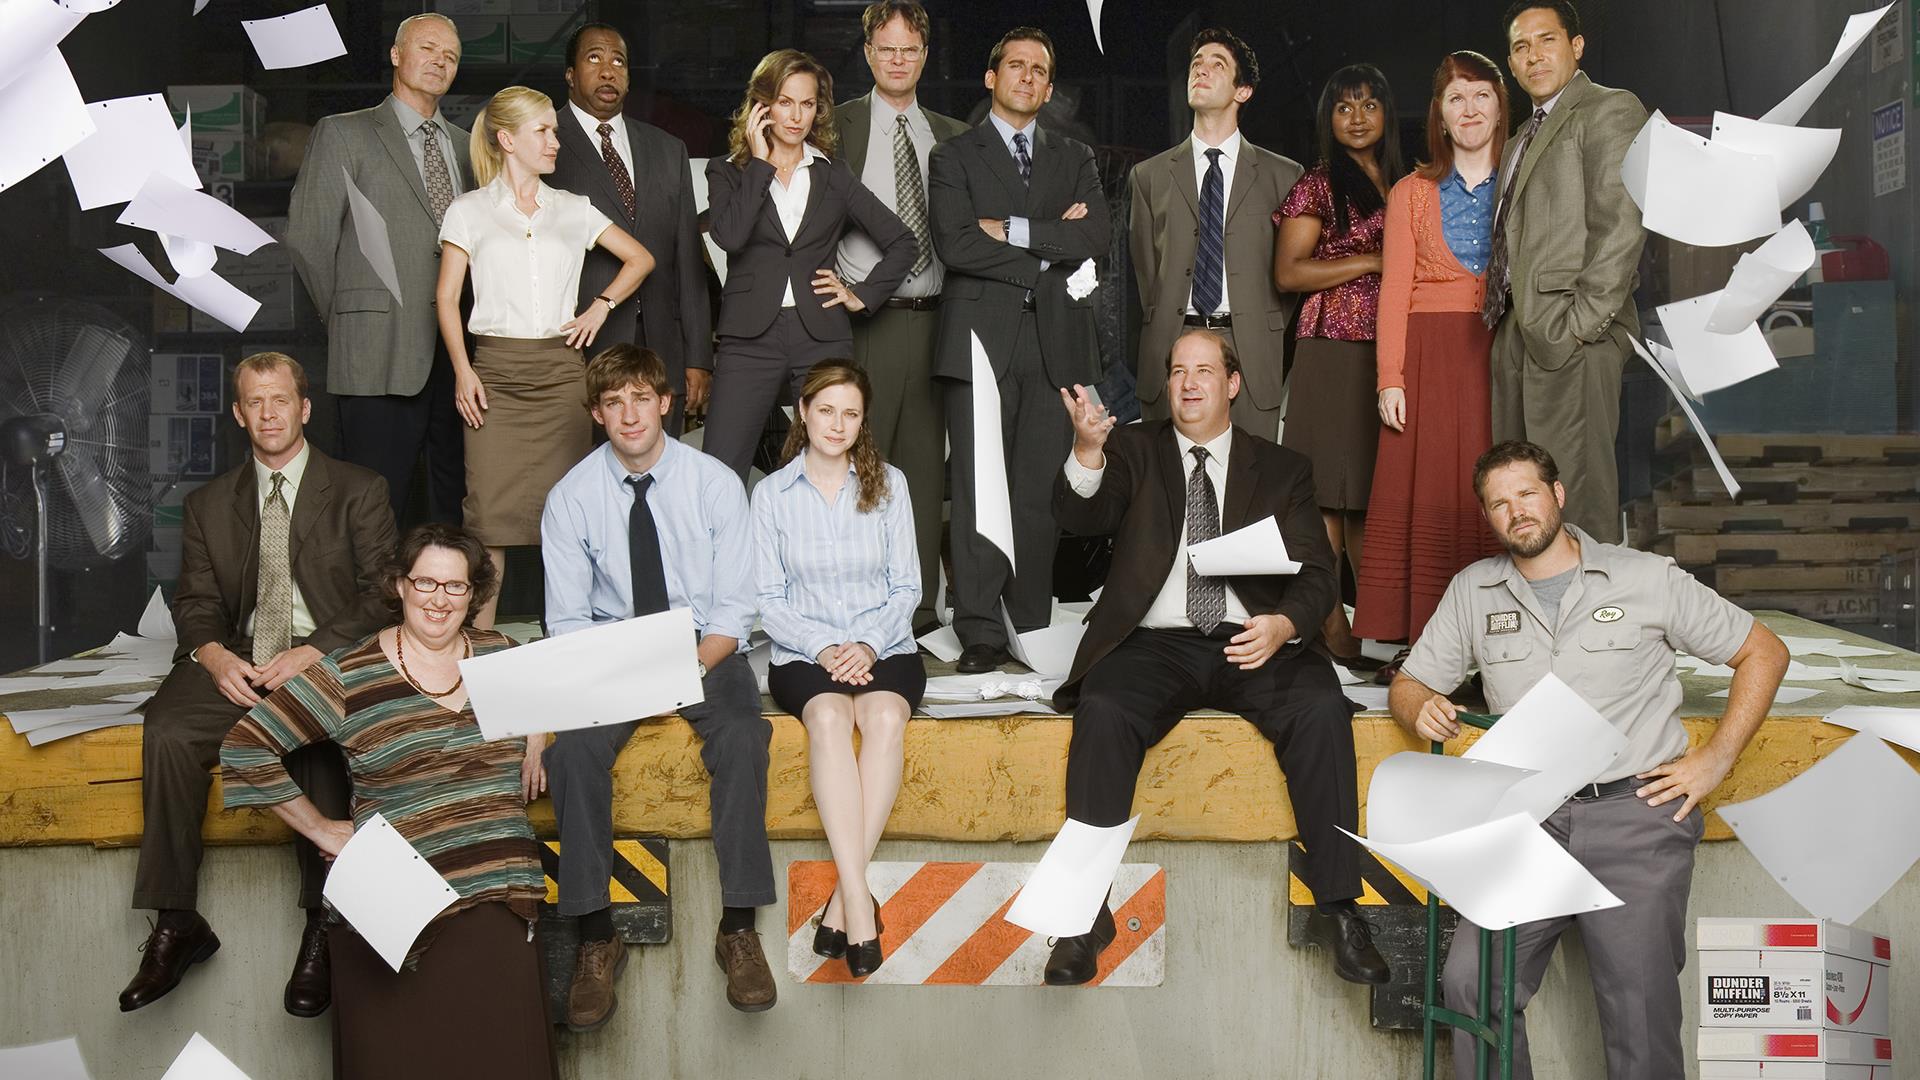 Get A 1st Look At 'The Office' Star's Behind The Scenes Photo From Upcoming Book